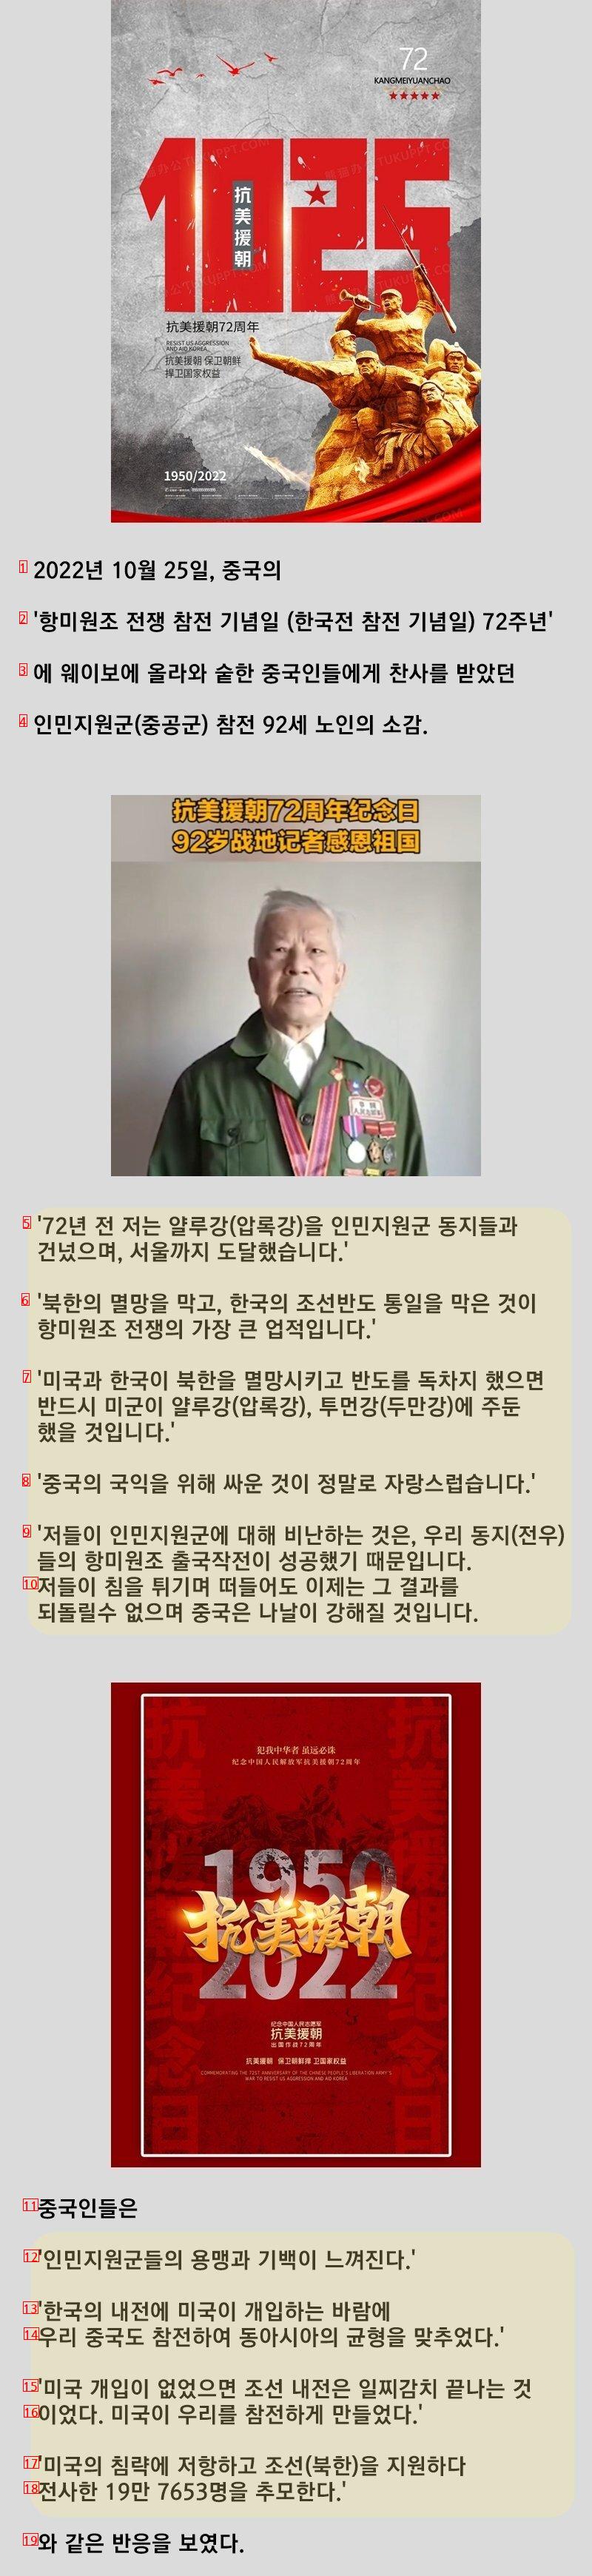 Interview with a 92-year-old man who participated in the Chinese military with 72 million views.JPG